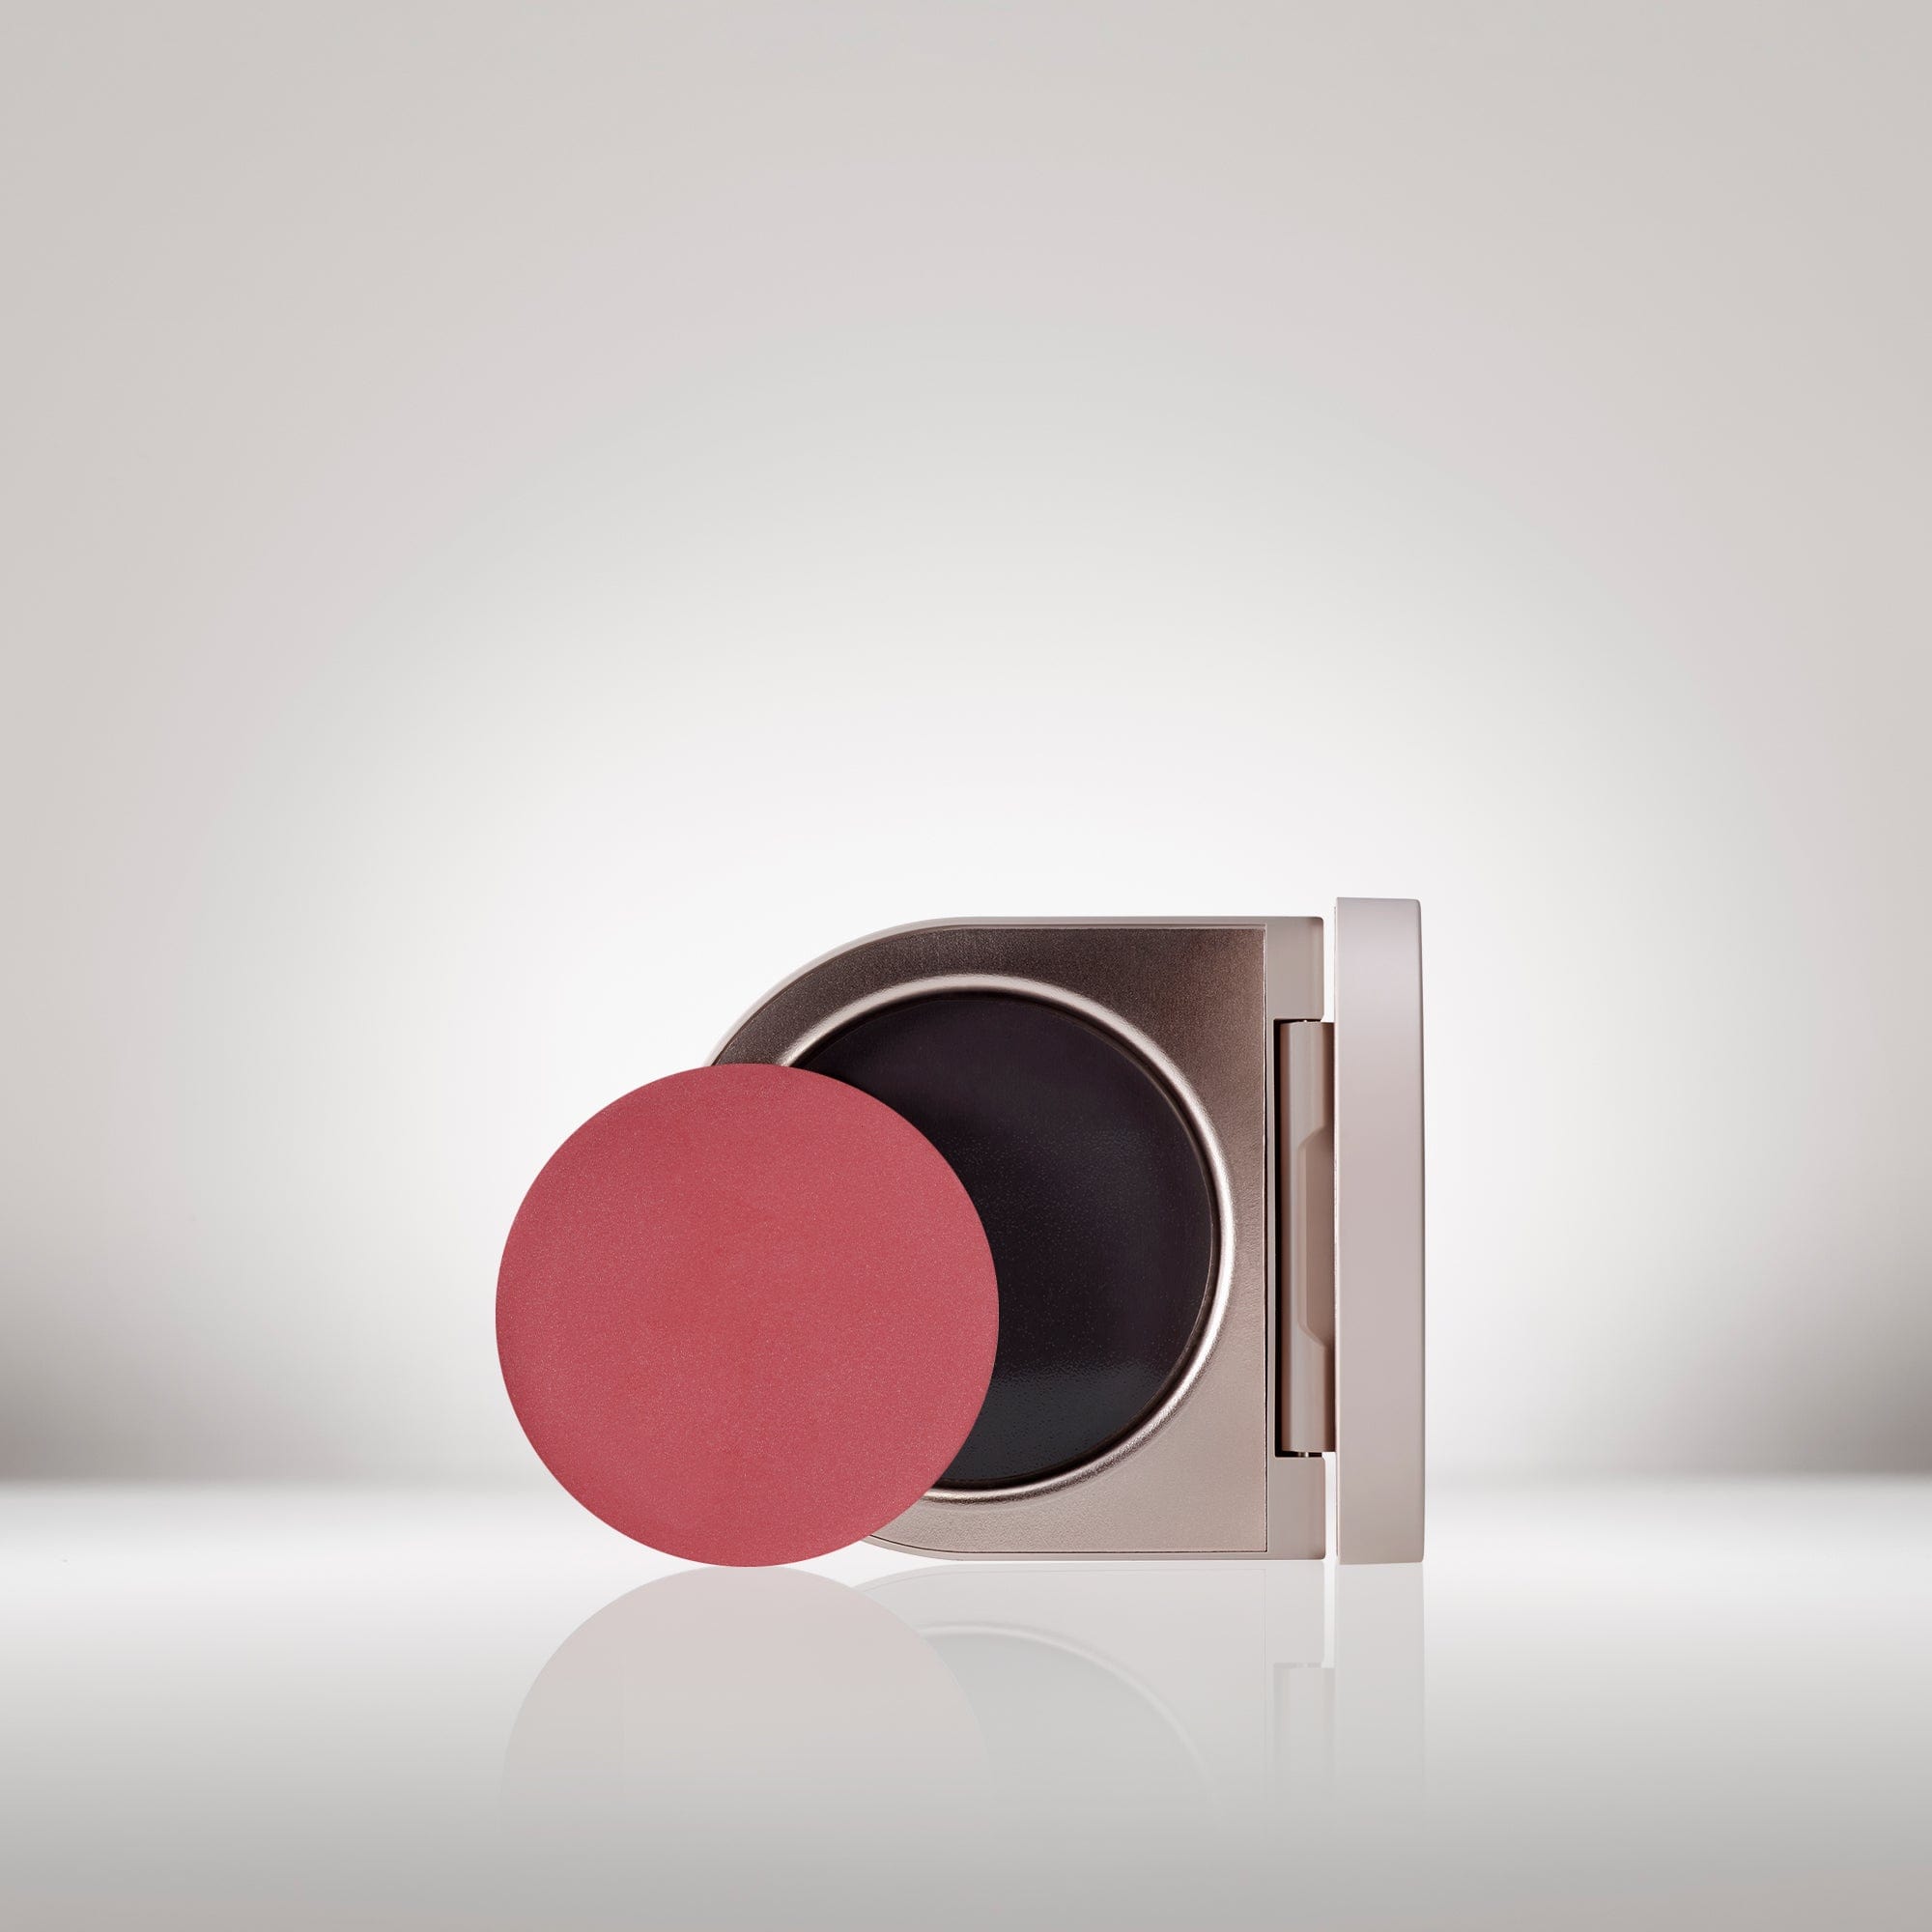 Image of the Cream Blush Refillable Cheek & Lip Color in Ophelia in front of the open compact- Cream blush